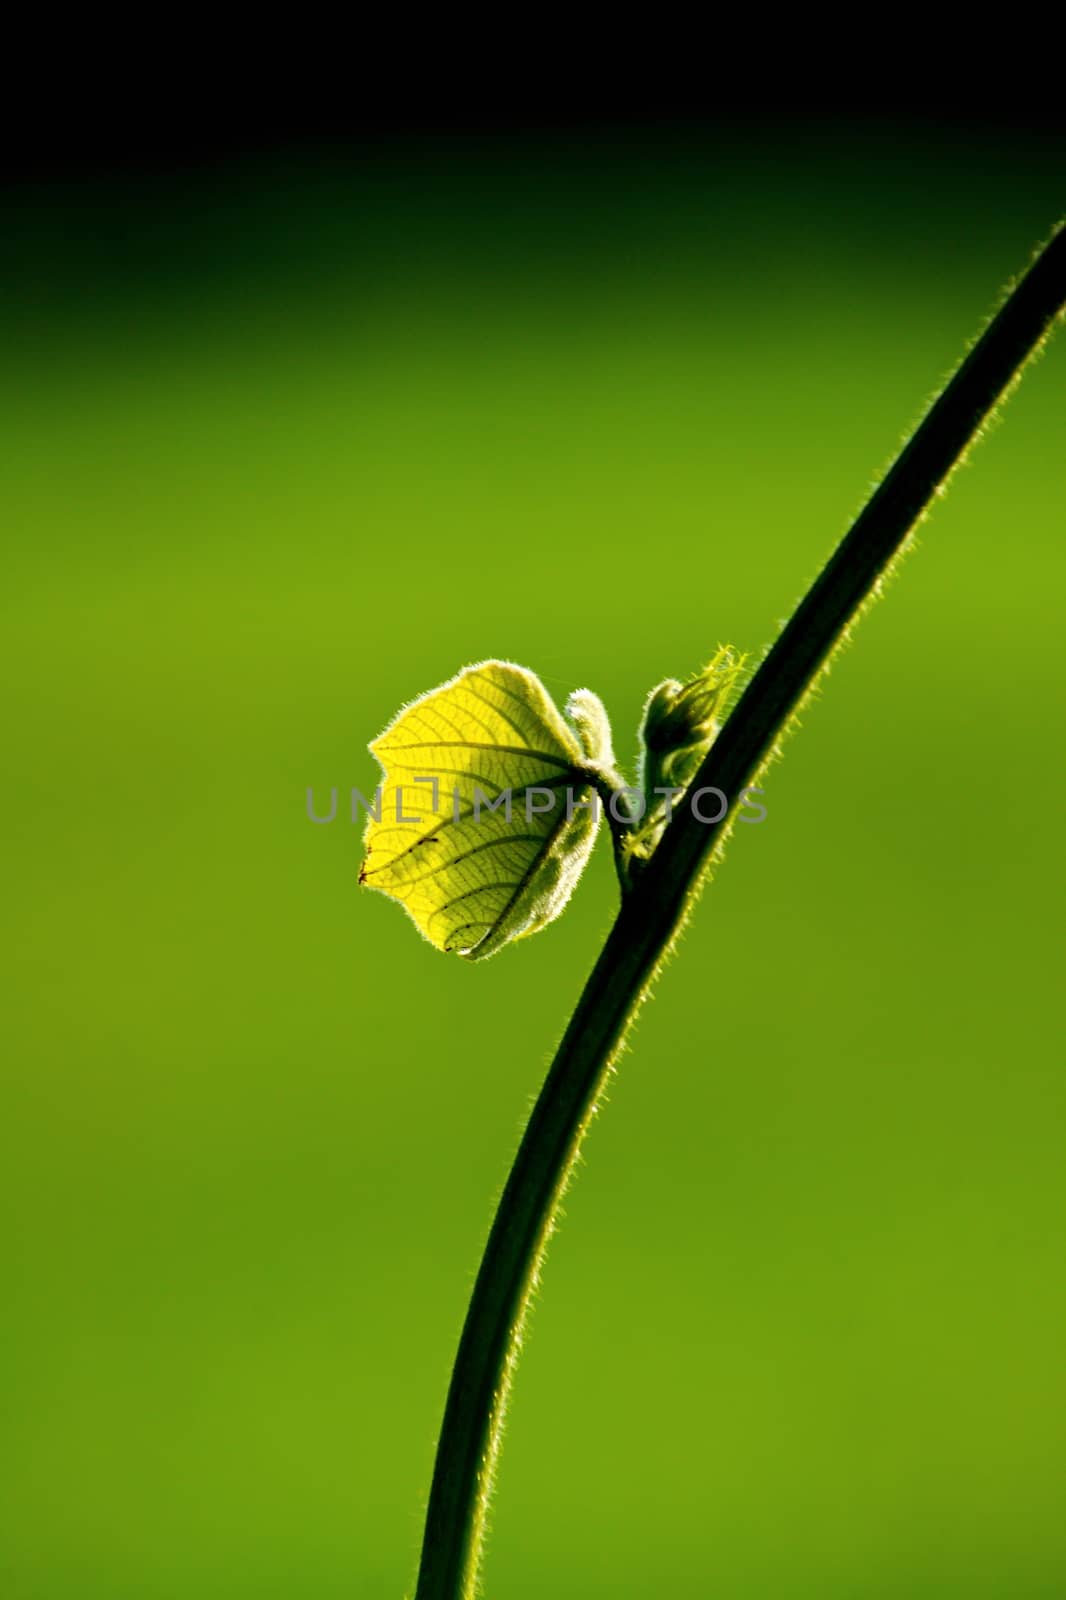 Fresh green leaf and vine on blur background, with rimlight in photo.